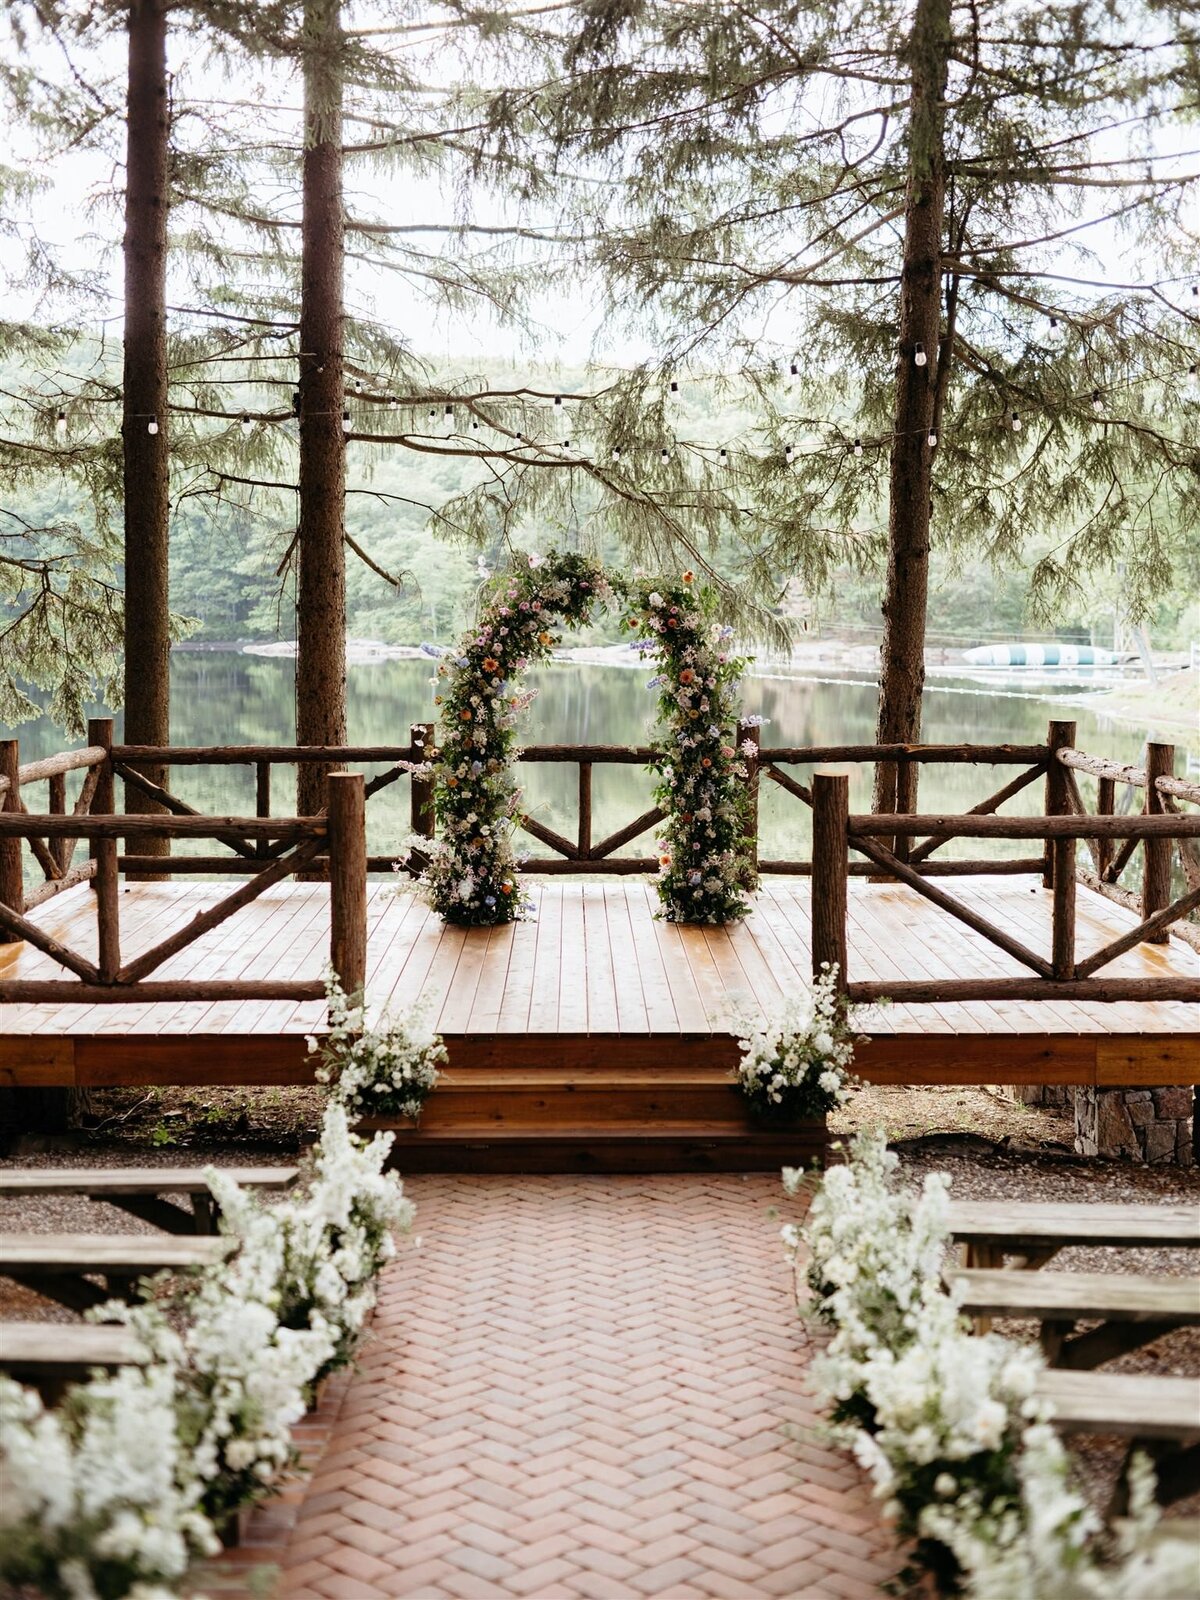 Stunning floral arbor by Canvas Weddings sits on wooden dock overlooking lake and trees at Cedar Lakes Estate wedding venue in Catskills; aisle lined with white florals